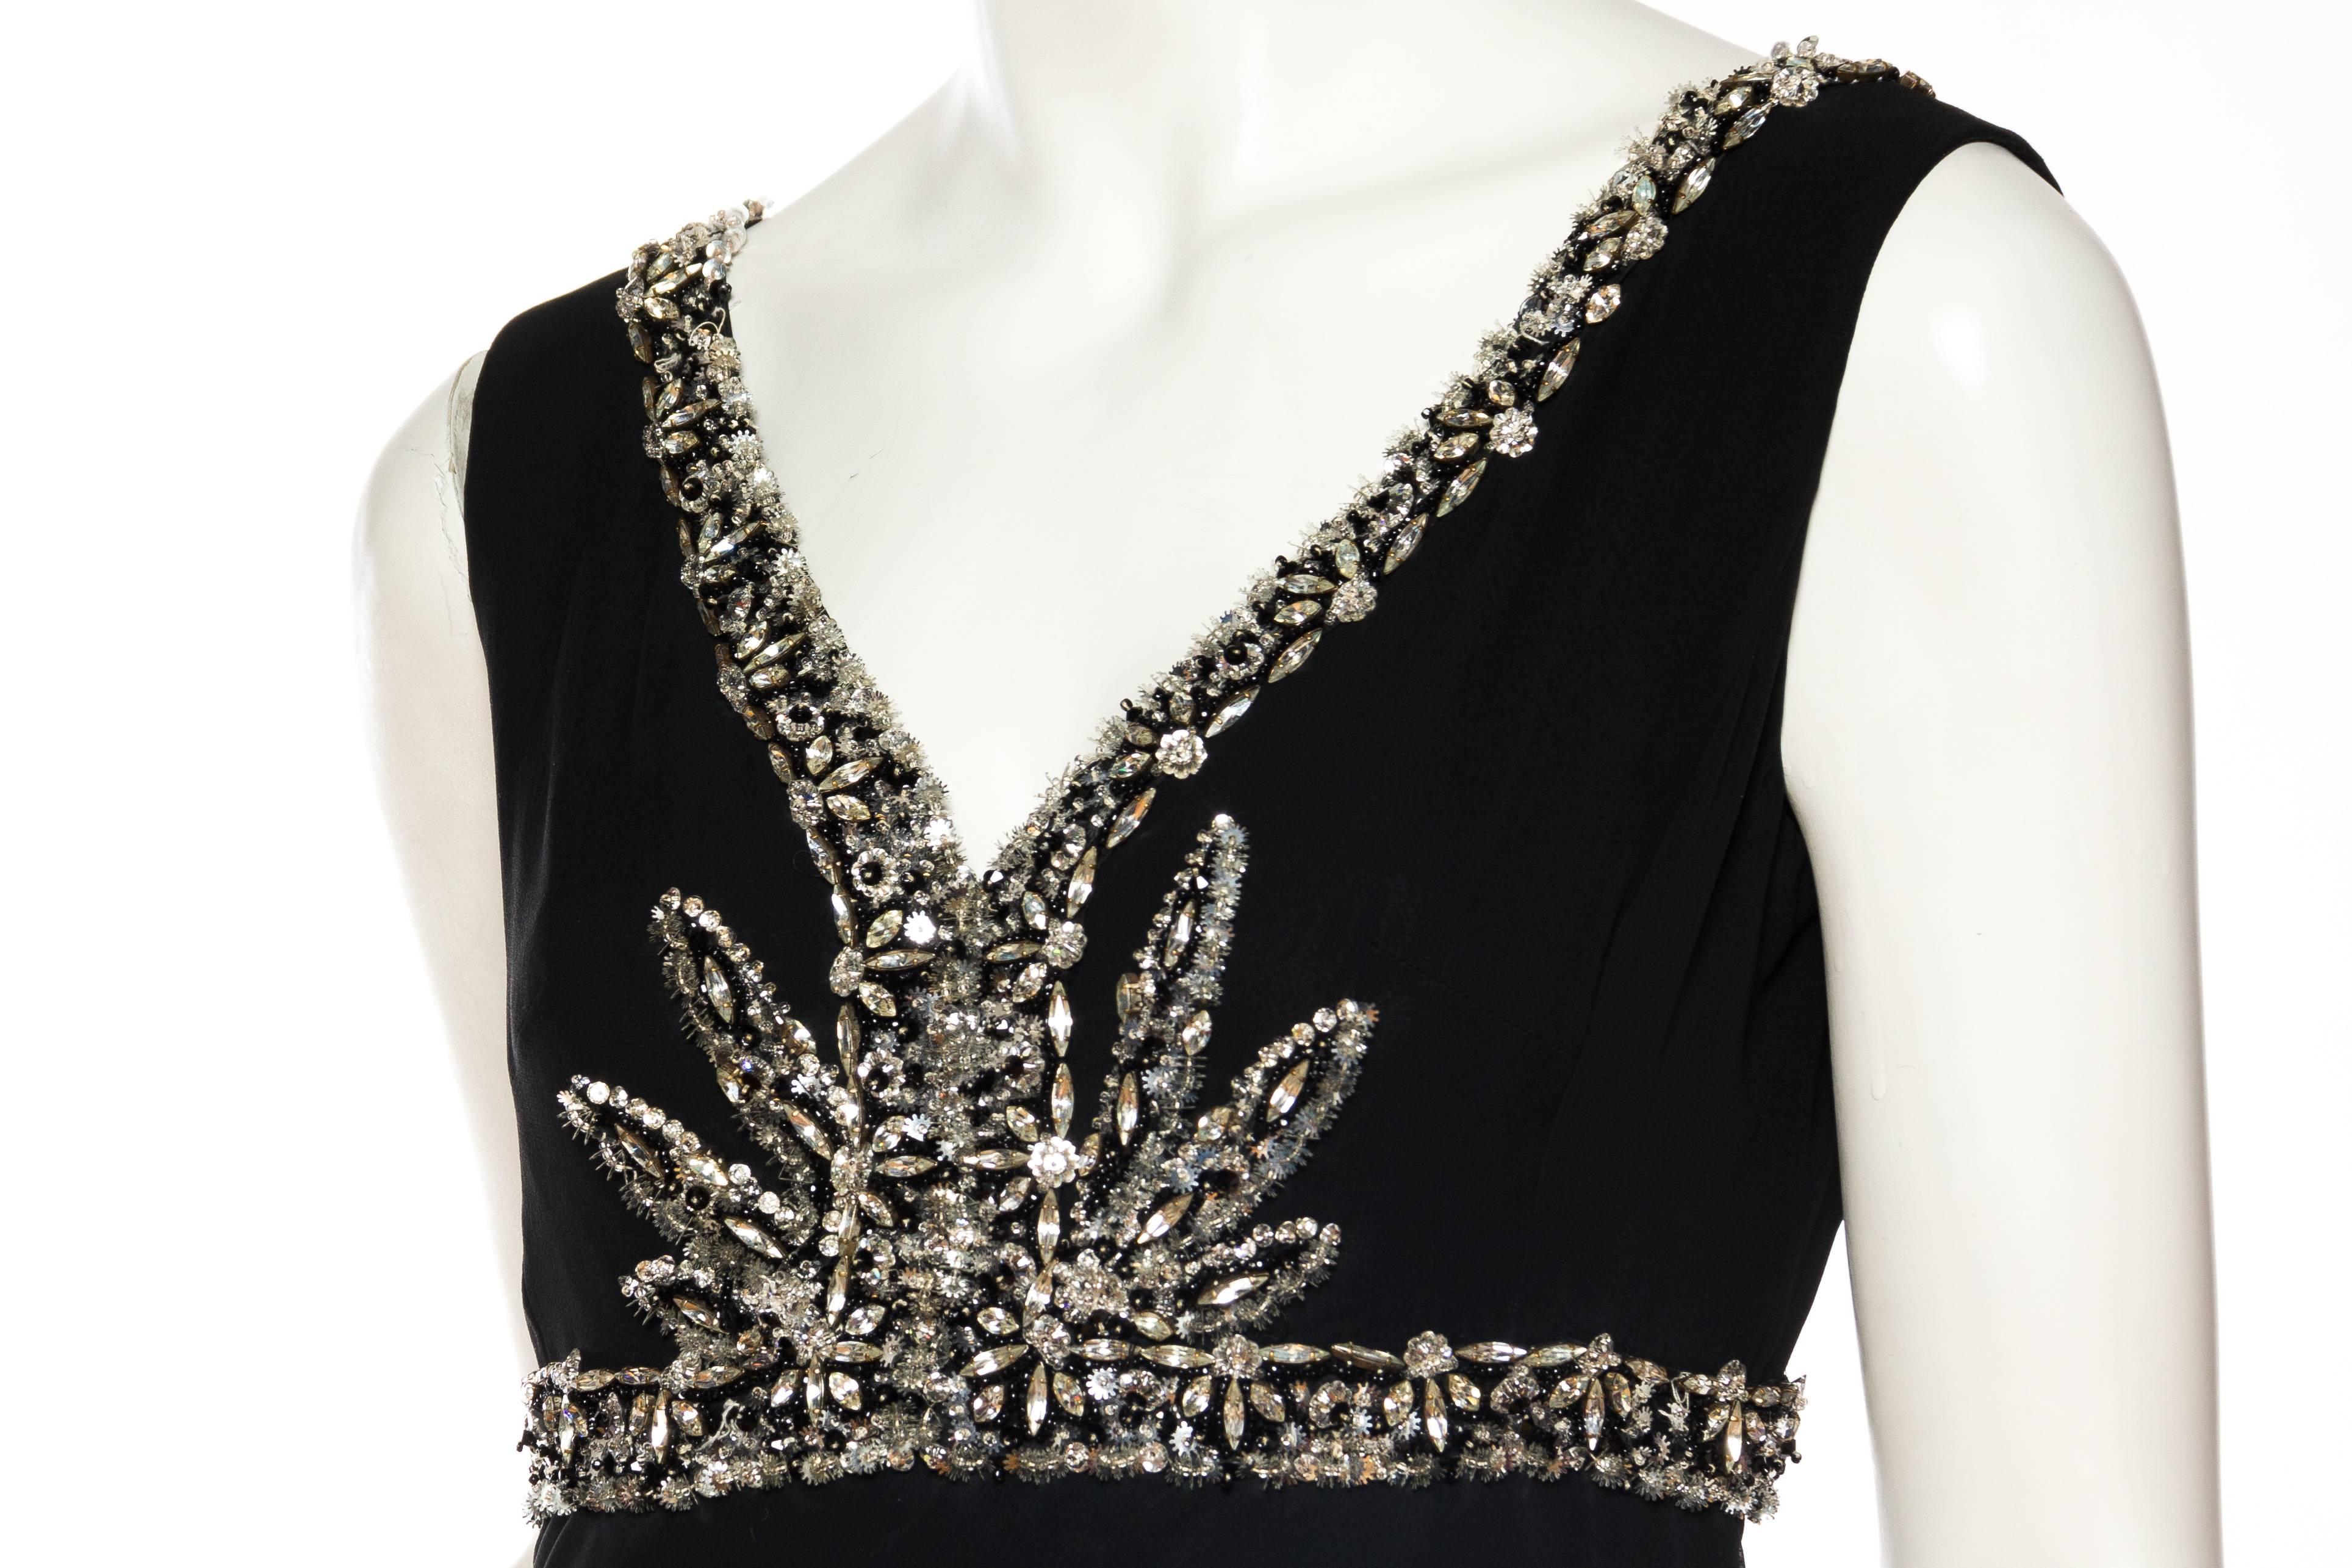 1970S RETY OF PARIS Black Haute Couture Silk Chiffon Crystal Beaded Empire Wais For Sale 1